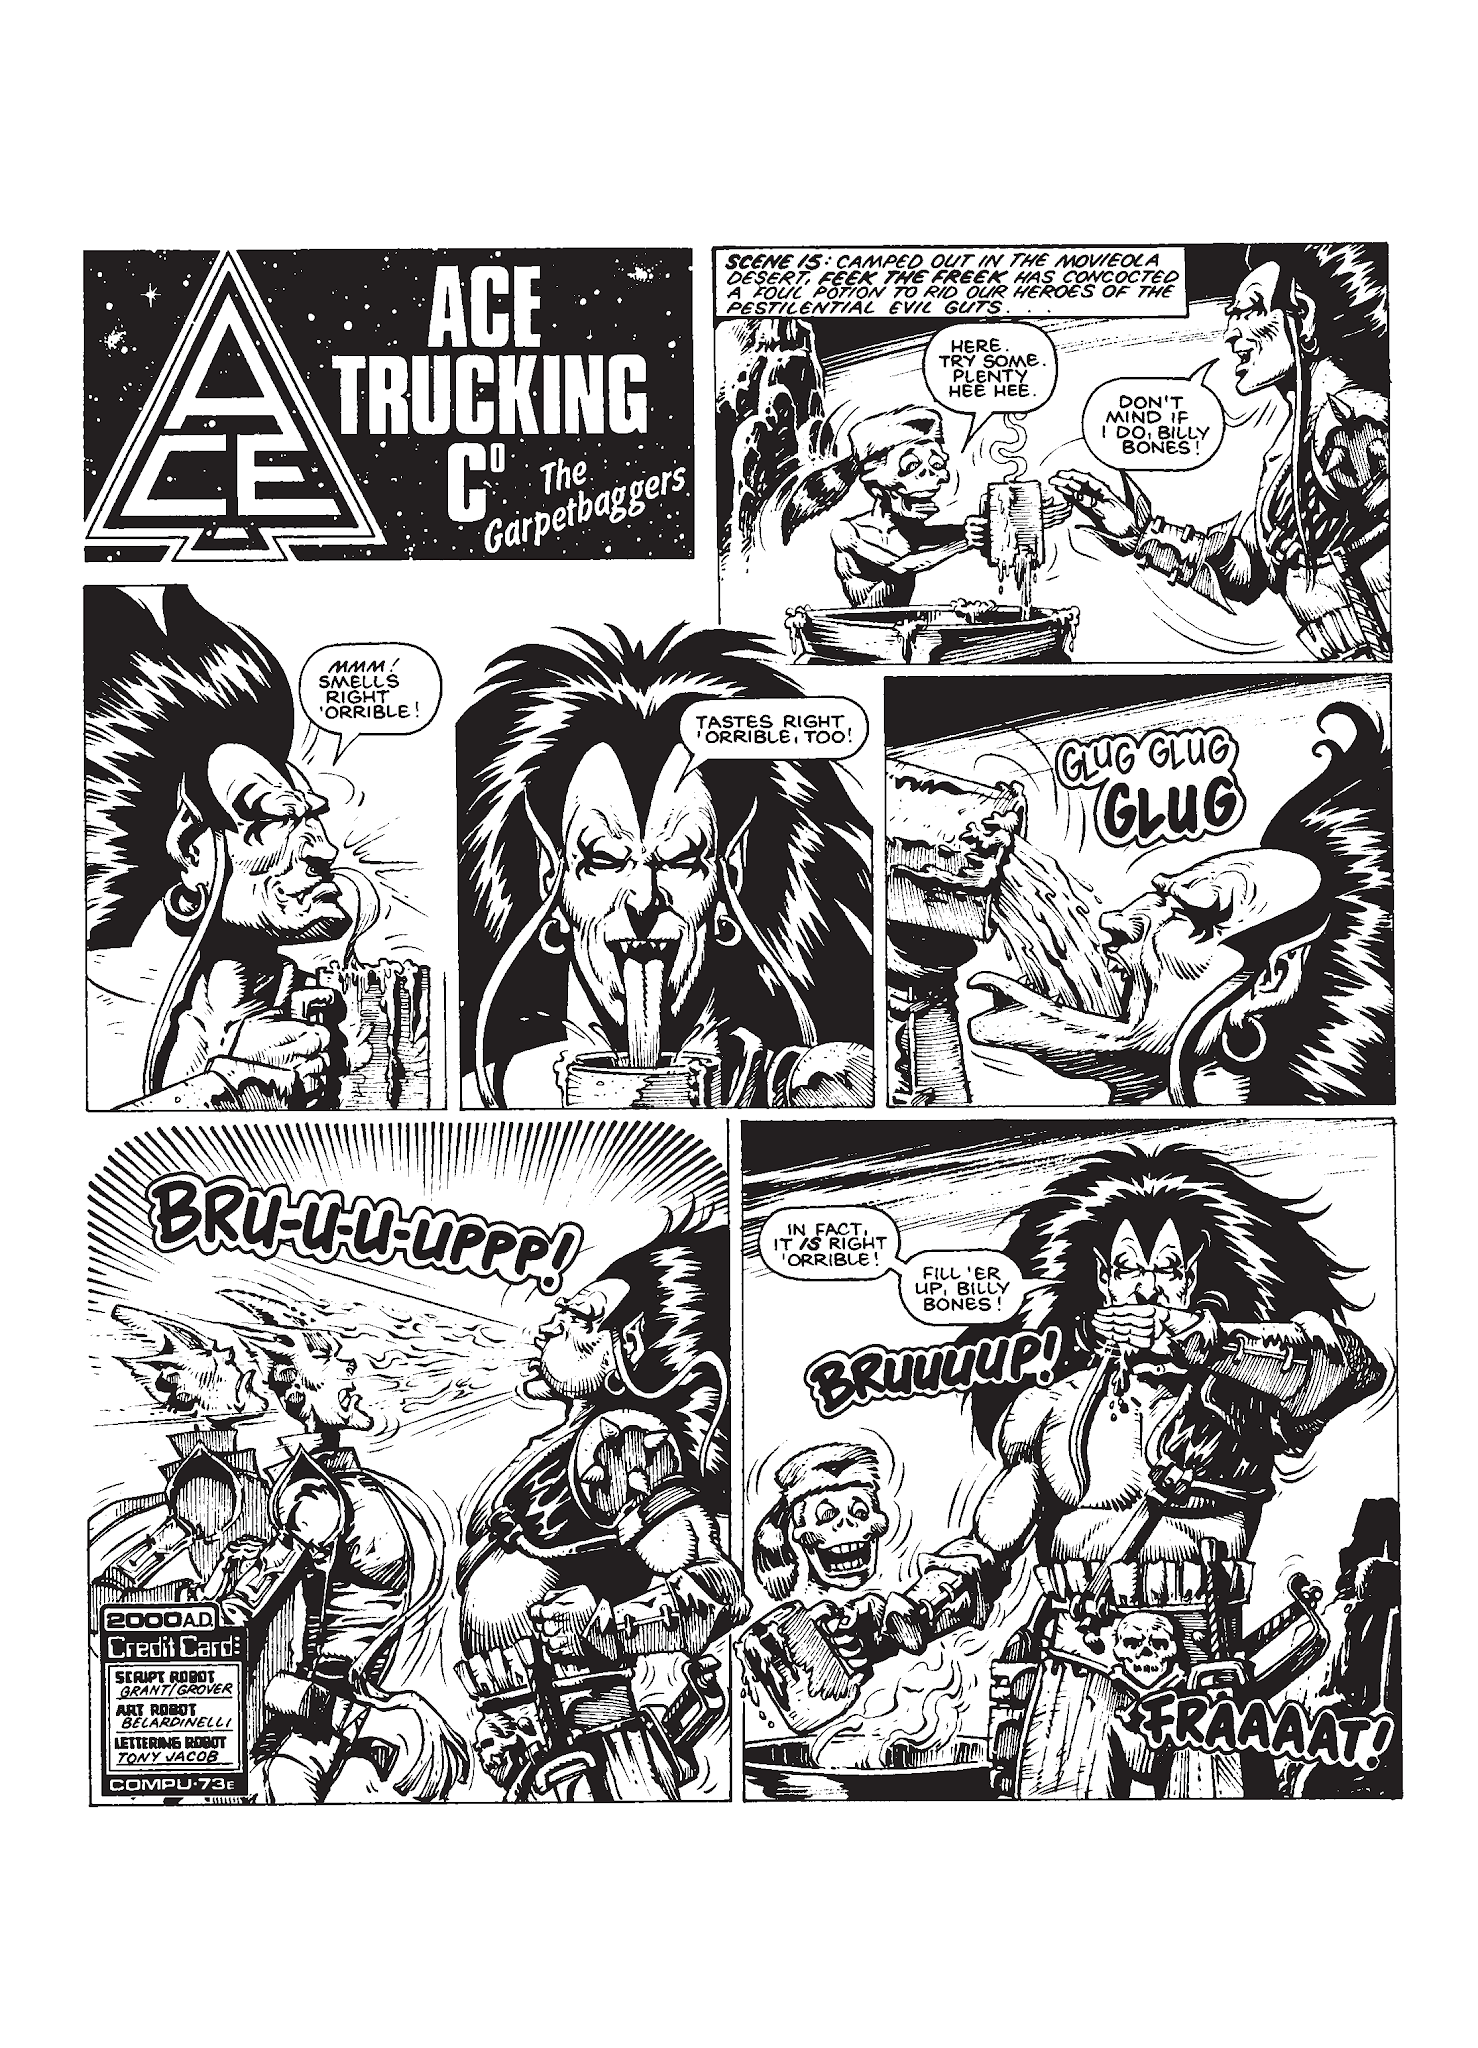 Read online The Complete Ace Trucking Co. comic -  Issue # TPB 2 - 290